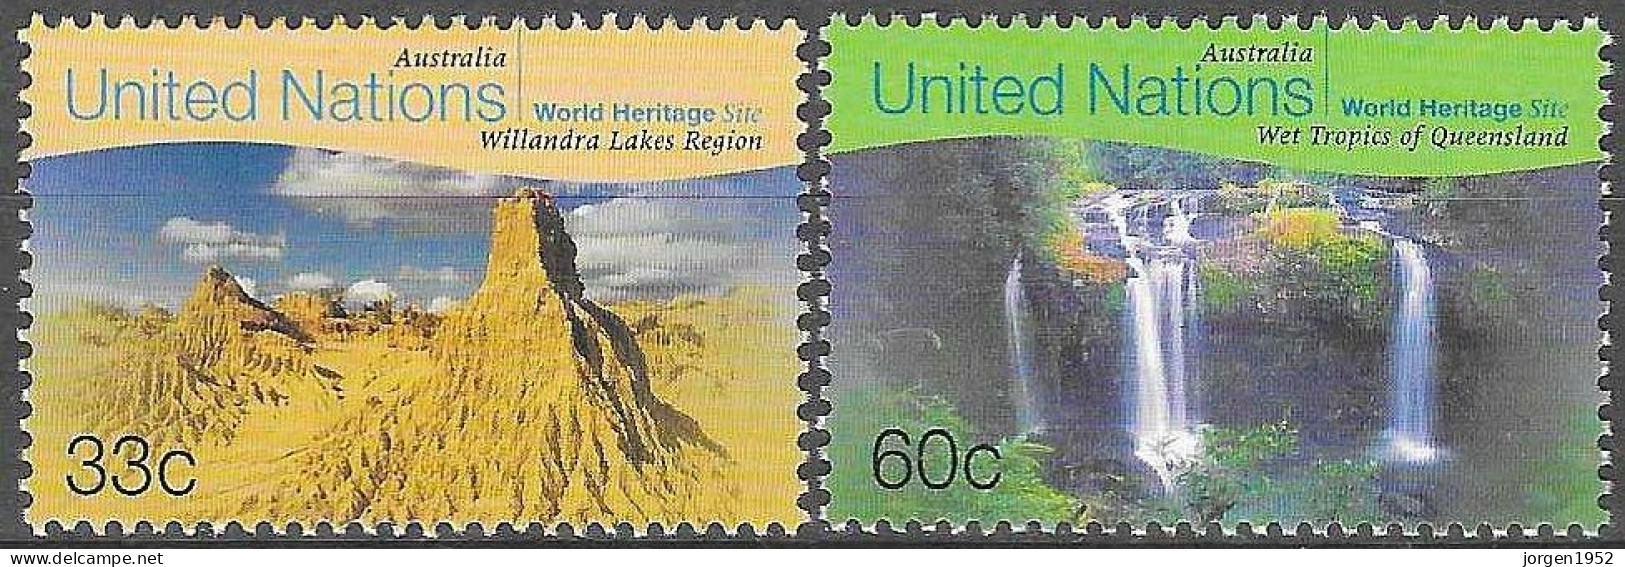 UNITED NATIONS # NEW YORK FROM 1999 STAMPWORLD 807-08** - Neufs